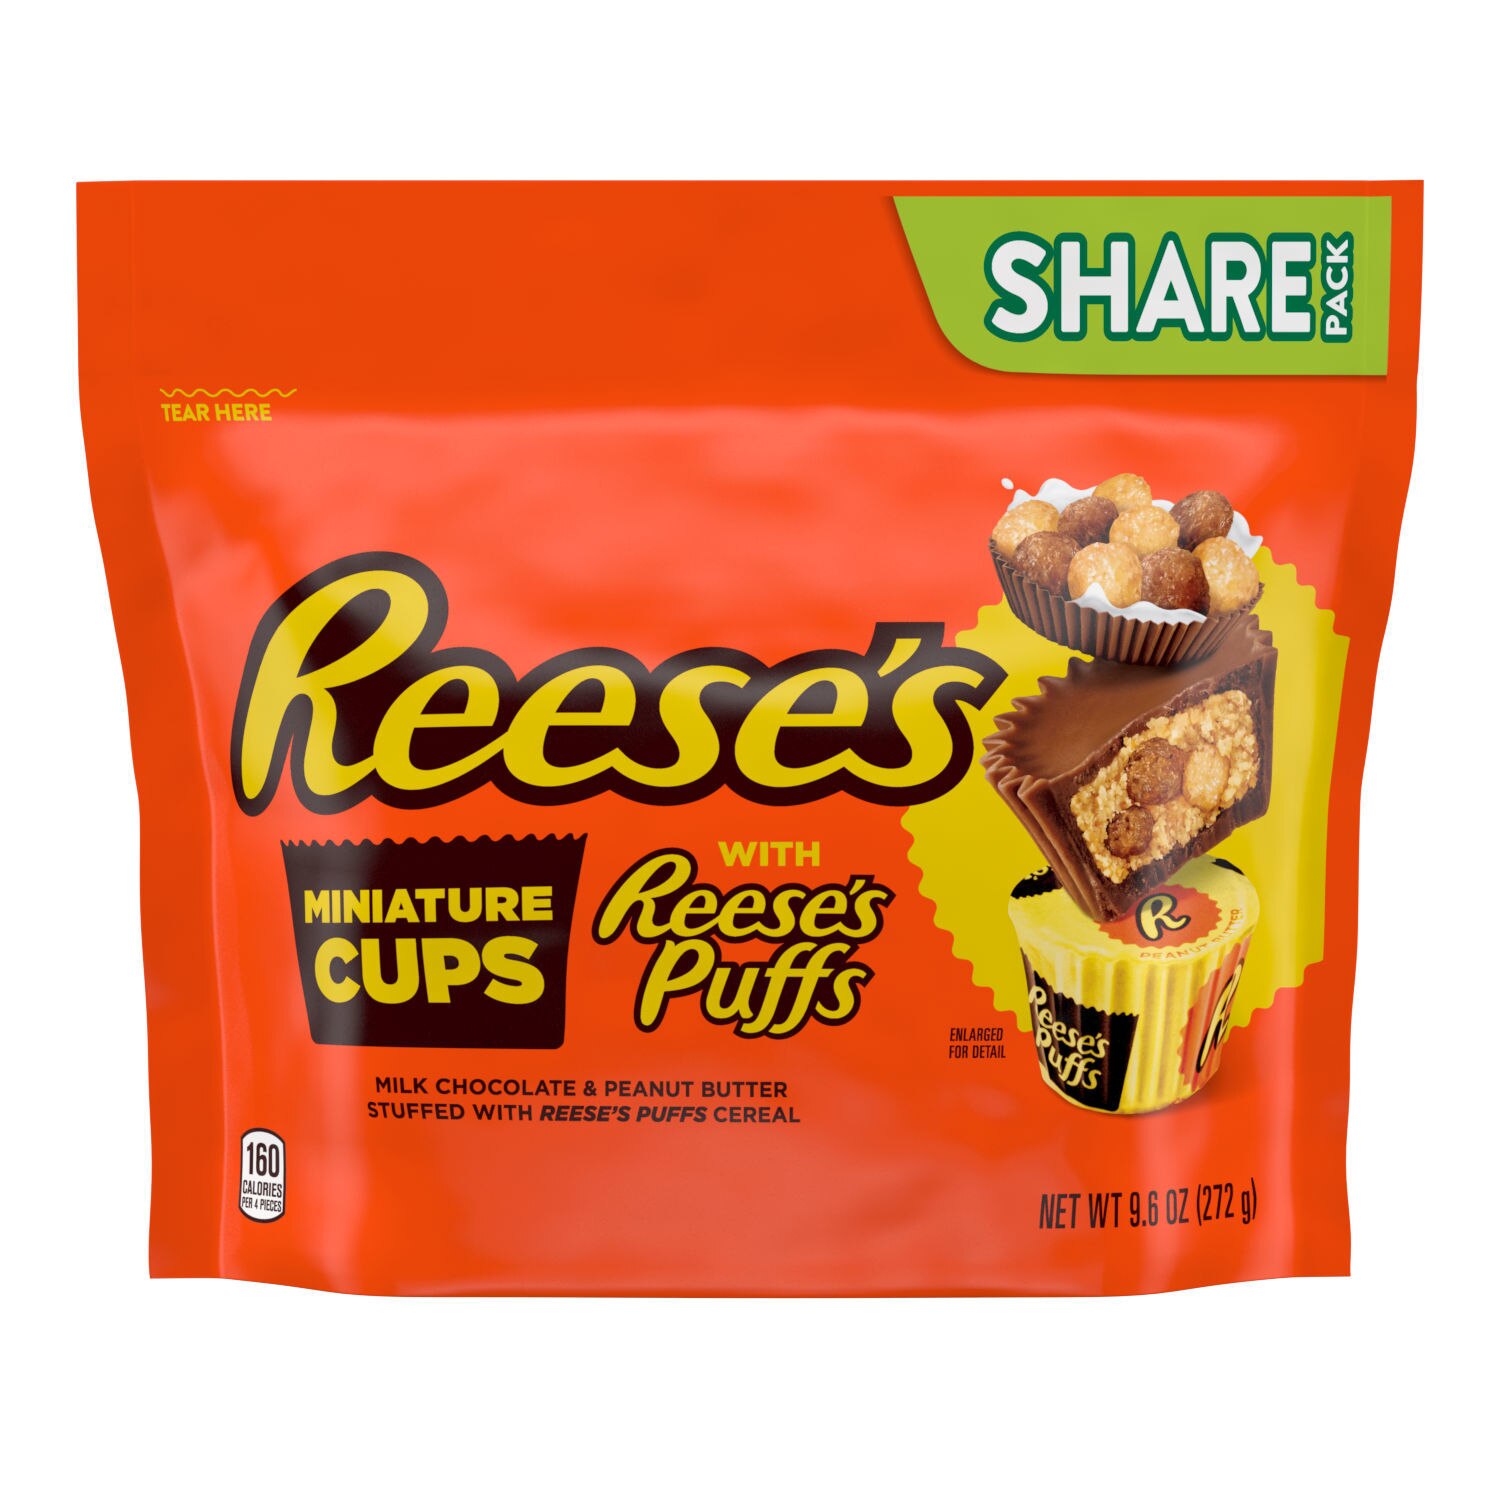 REESE'S Miniatures with Puffs Cereal Milk Chocolate Peanut Butter Cups, Gluten Free Candy Share Pack, 9.6 oz | CVS